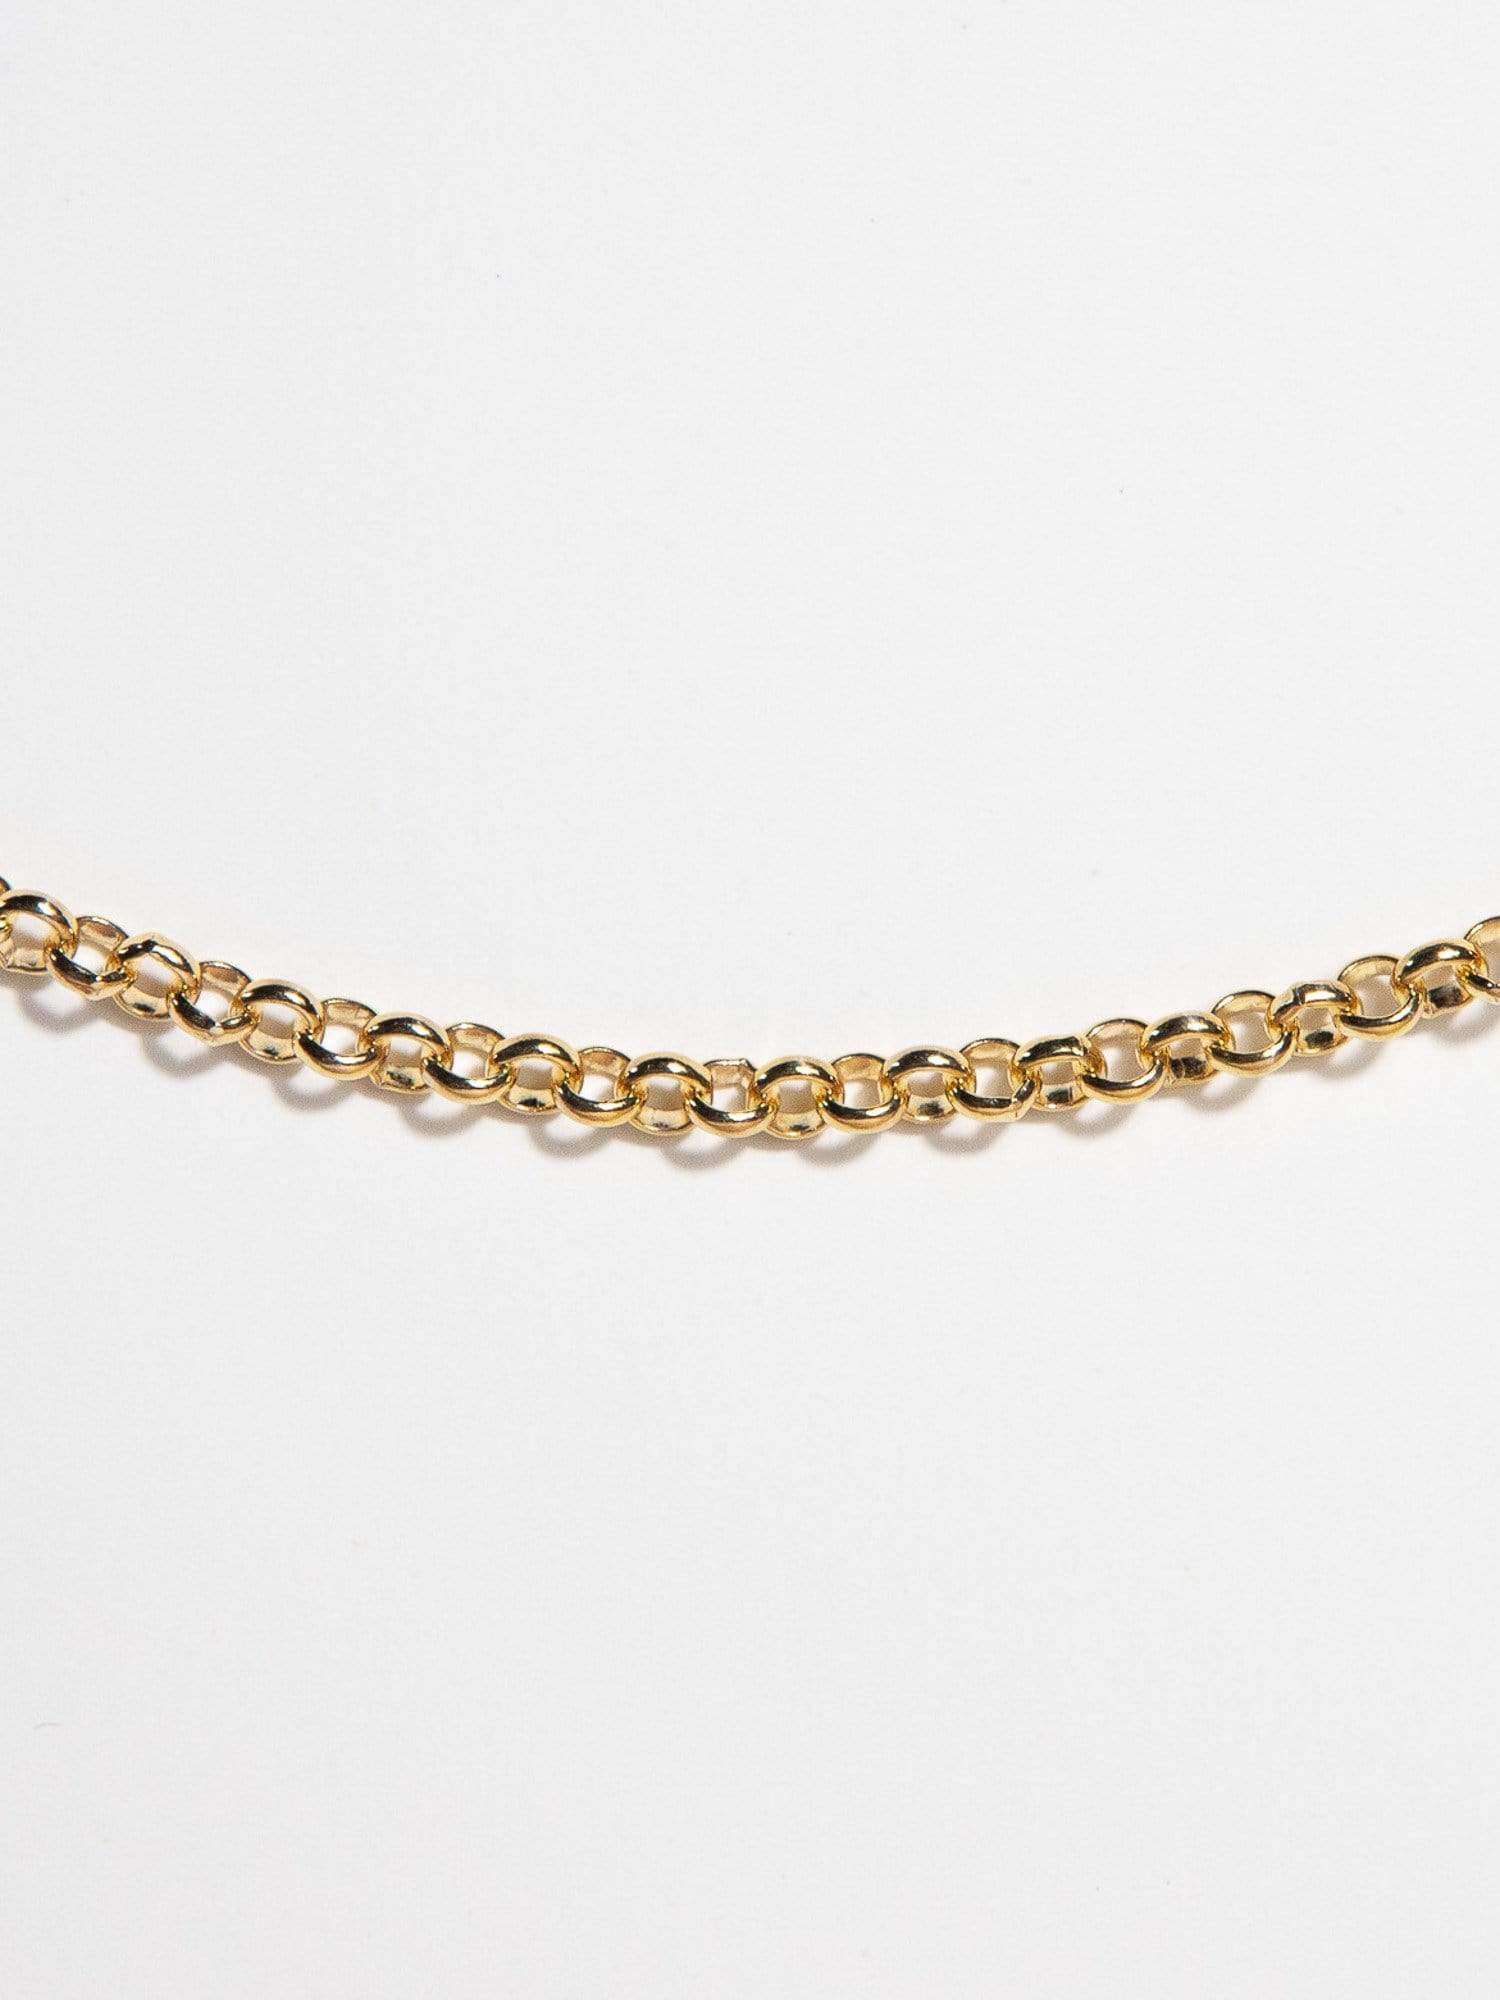 Shop OXB Necklaces Gold Filled / 16" XL Rolo Chain